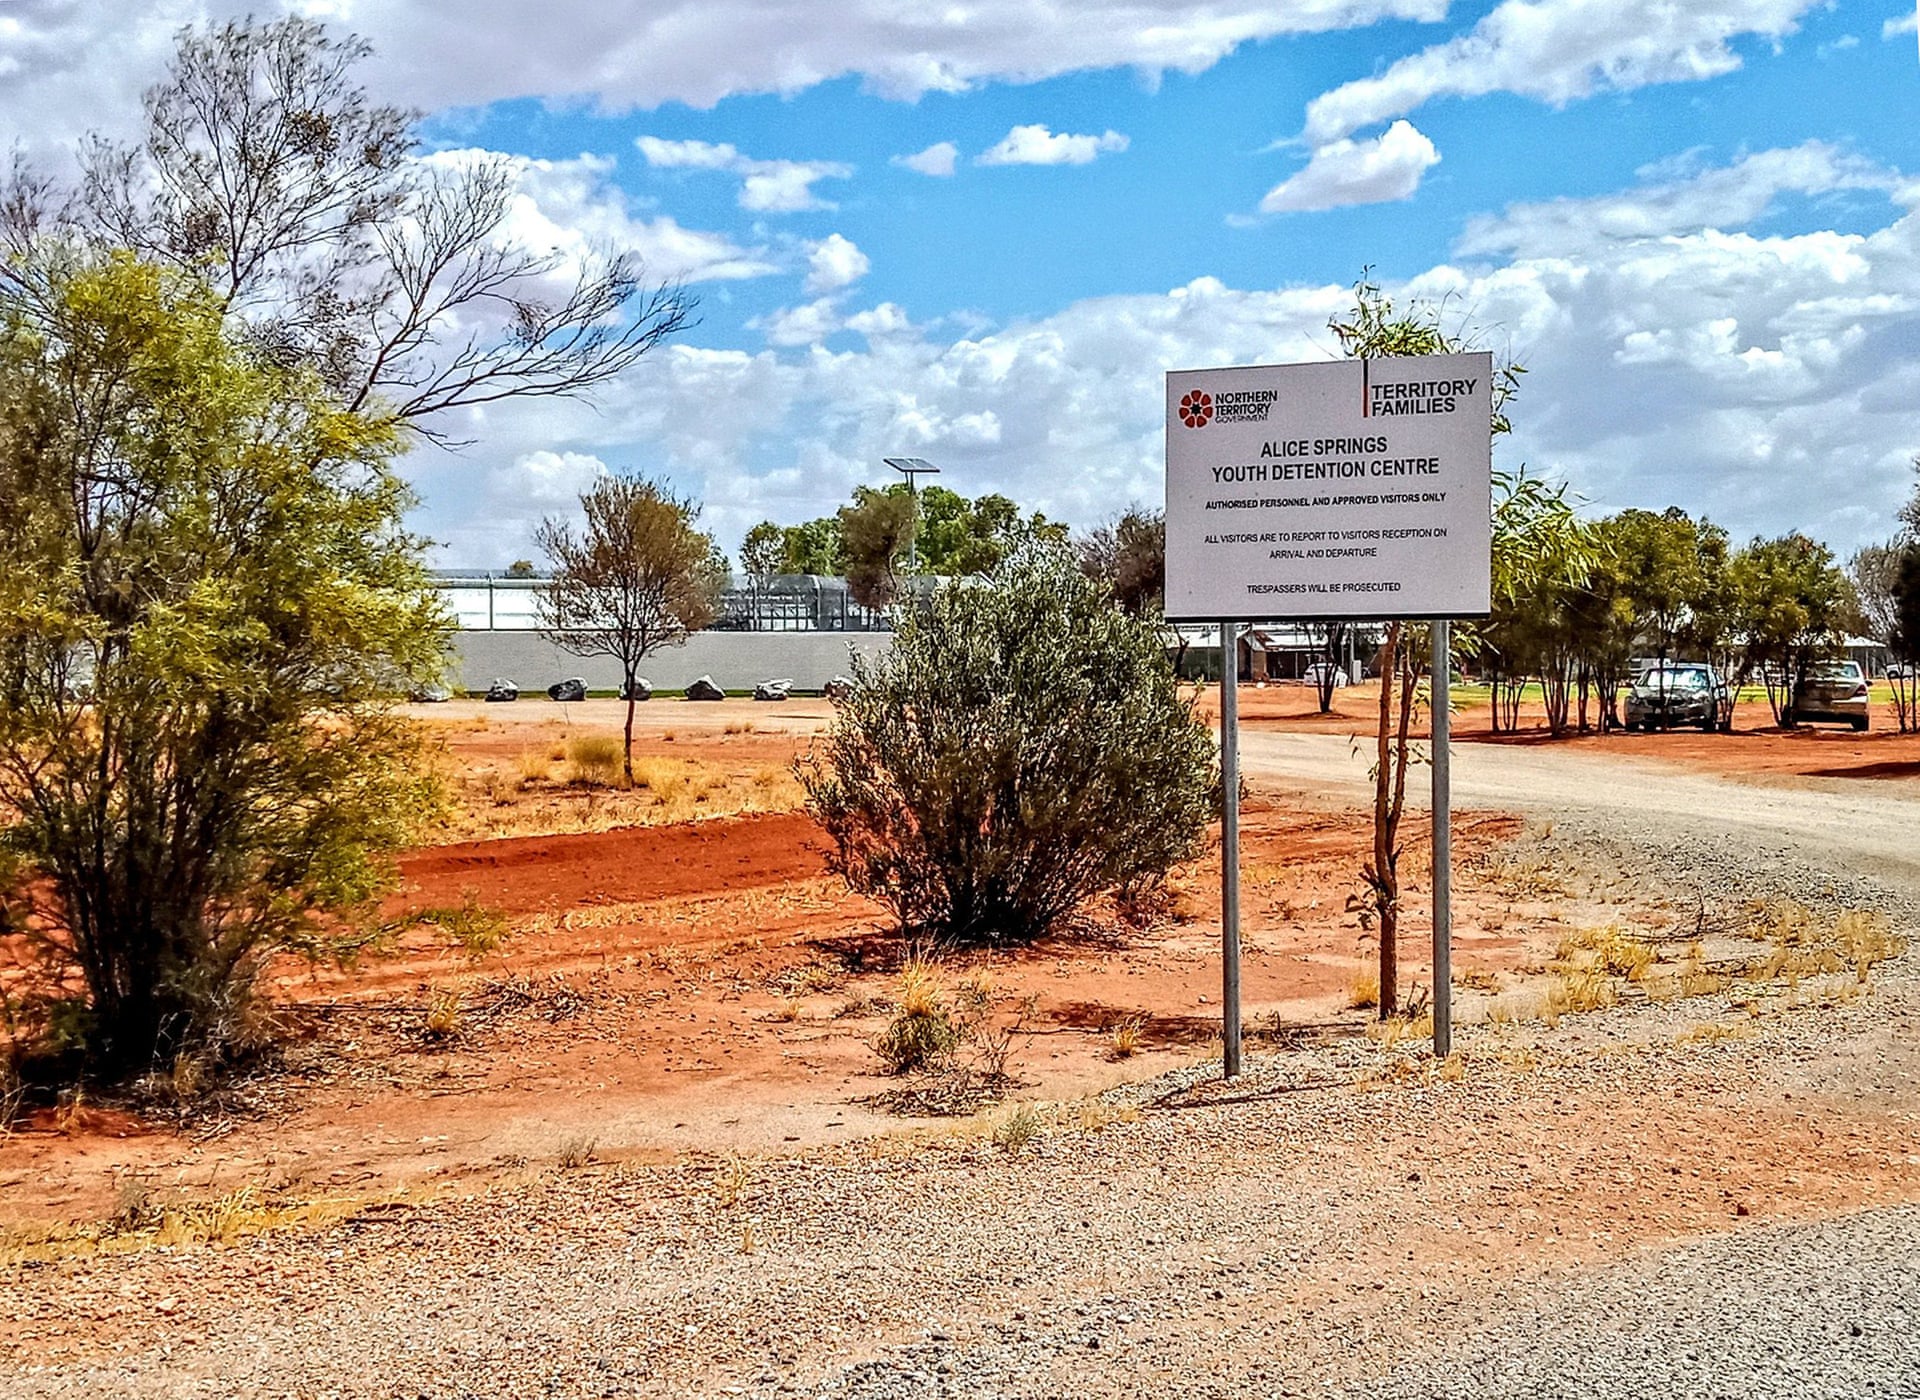 Alice Springs Youth Detention Centre